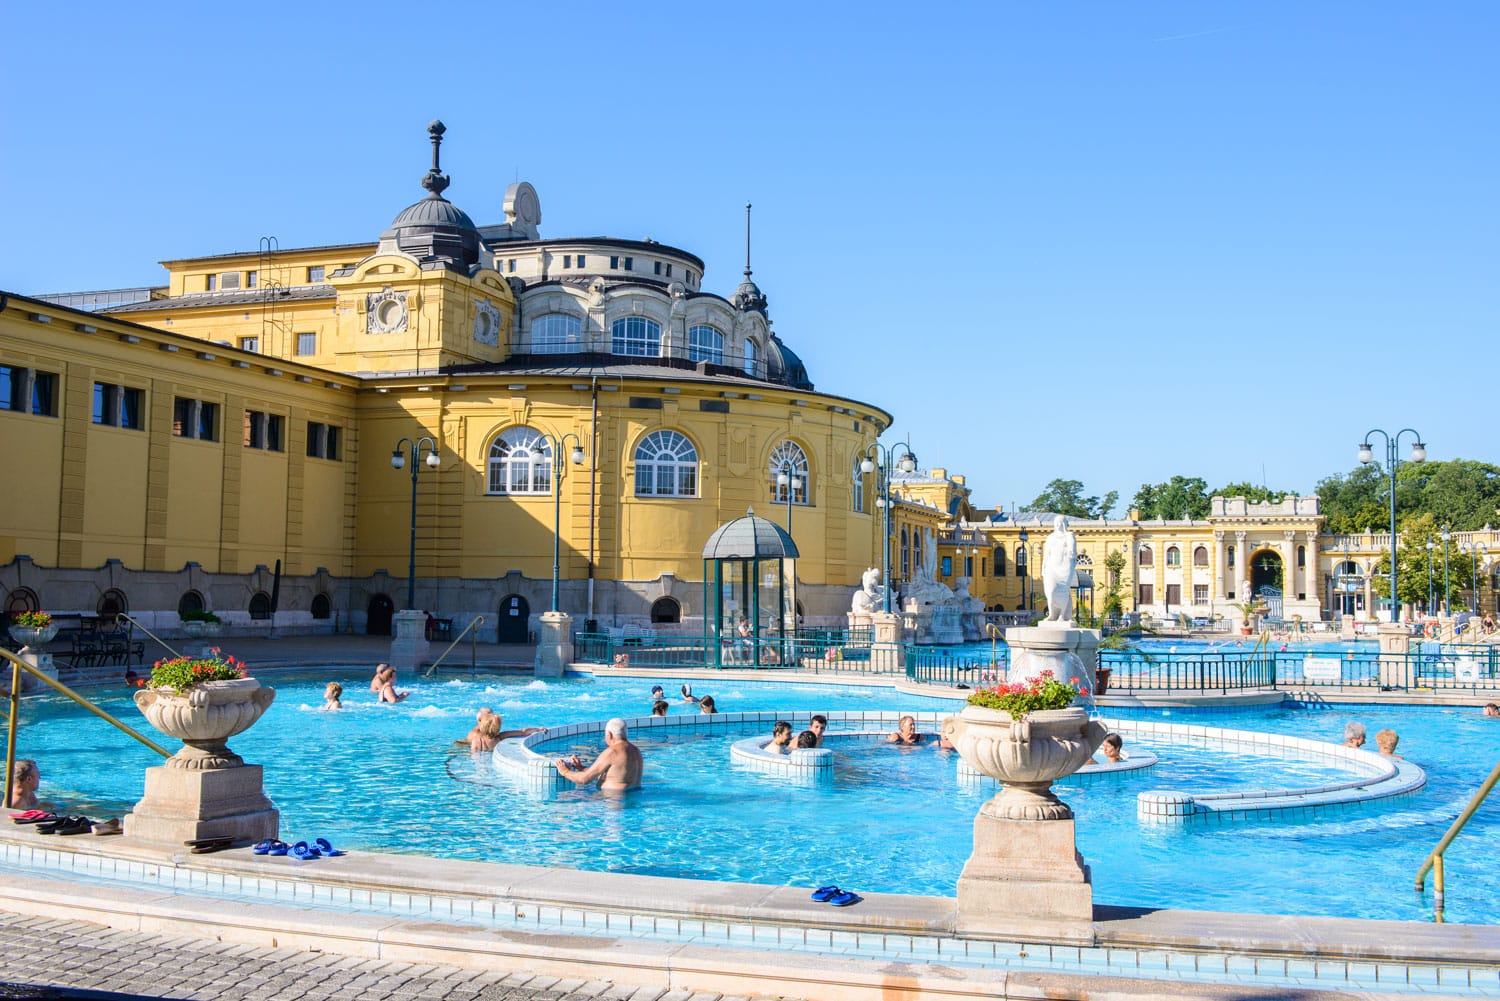 Buy Tickets to the Széchenyi